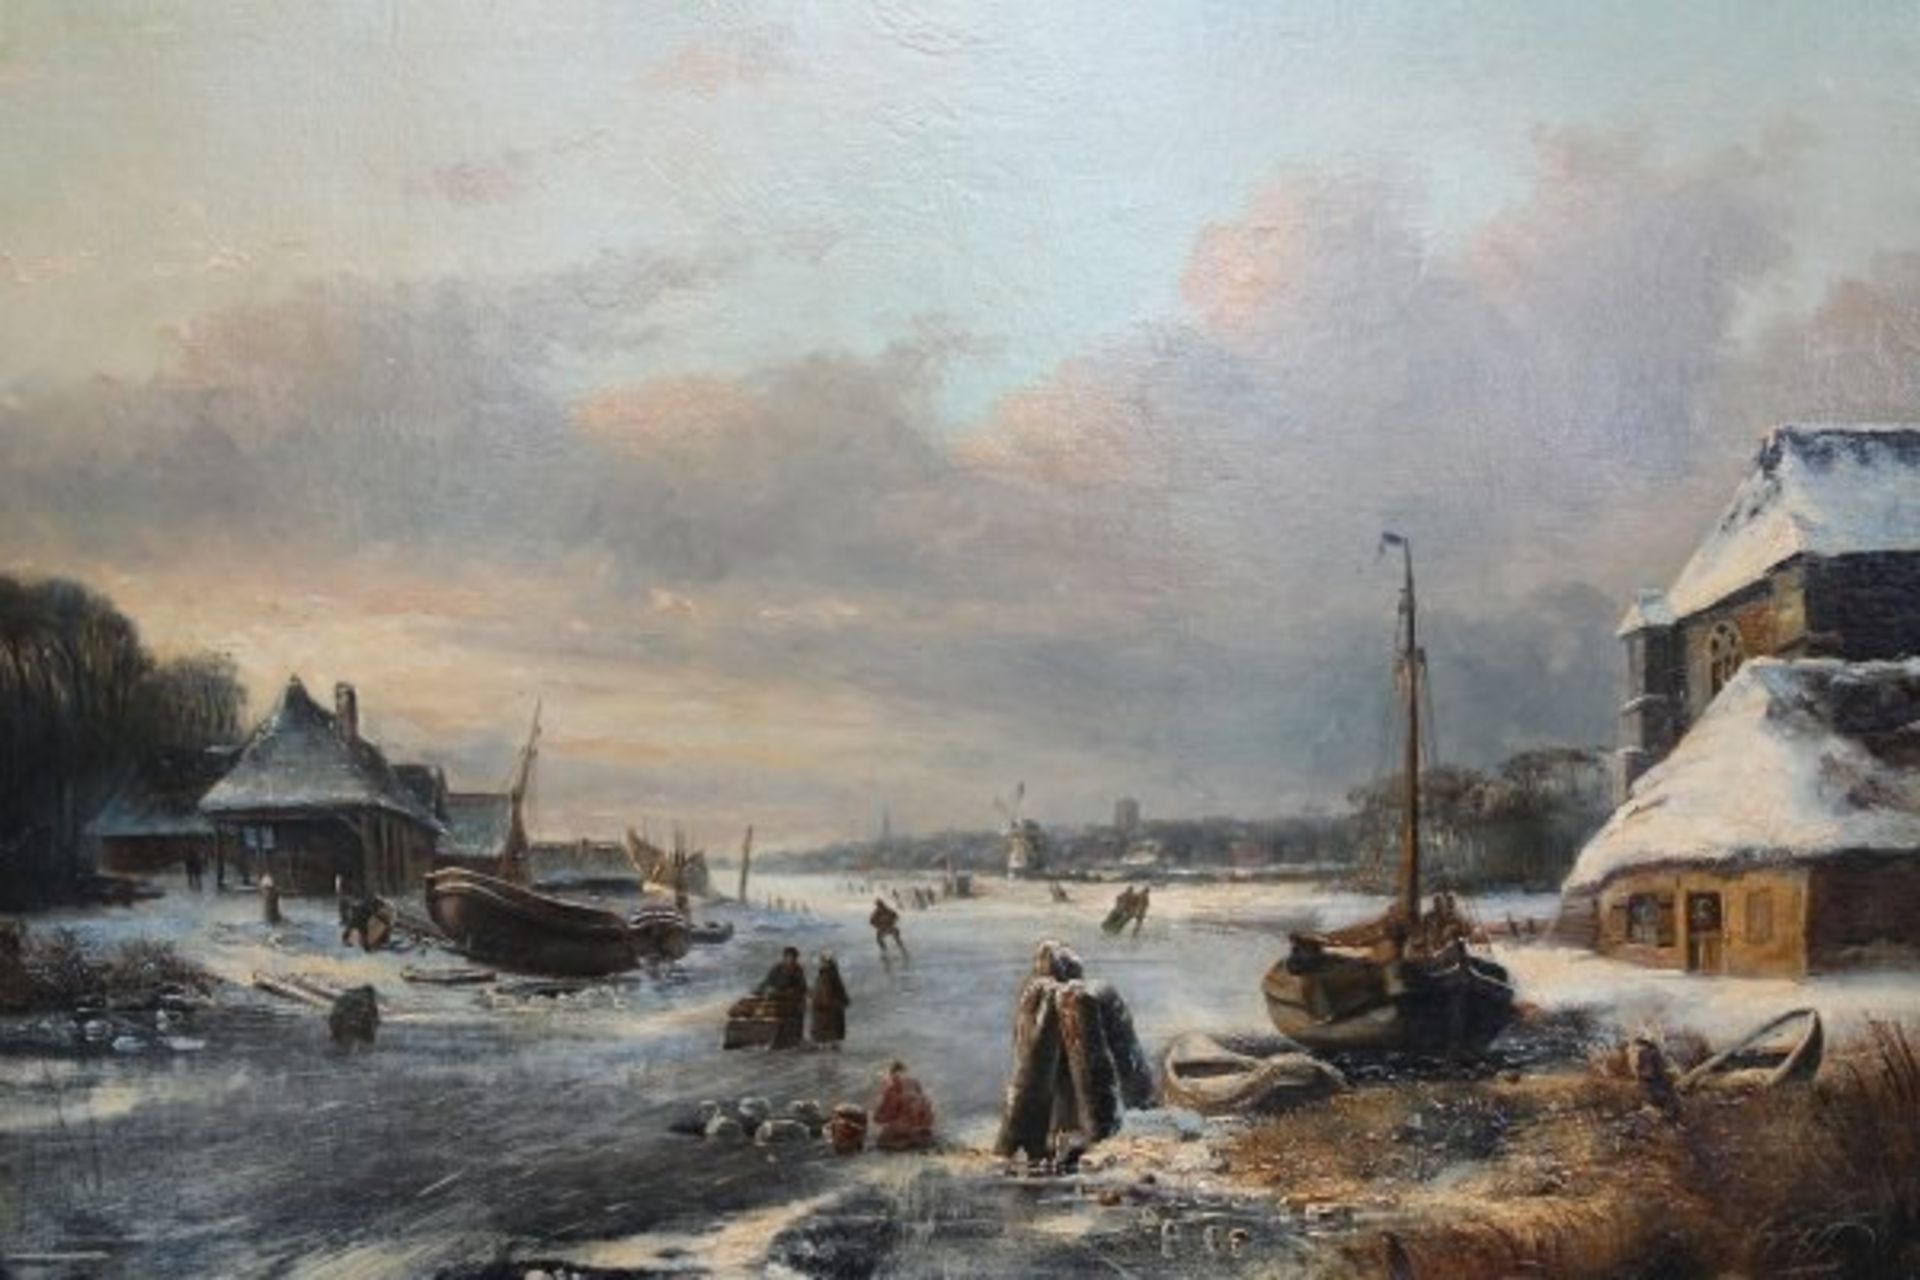 Antique painting "Winter" - Image 3 of 7